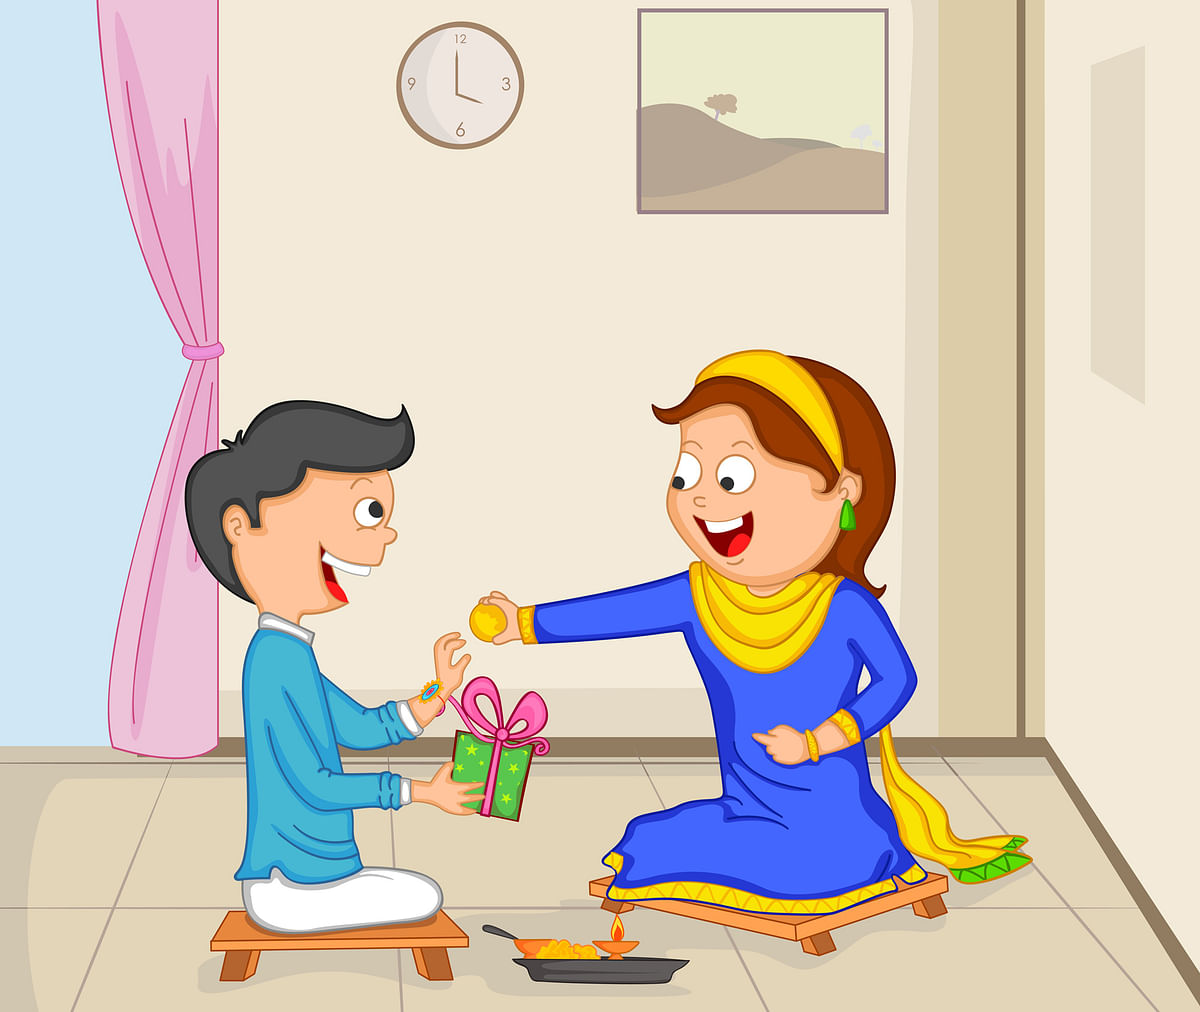 Traditional stories behind Bhai Dooj may reinforce the gender status quo, but here’s a refreshing take that doesn’t.